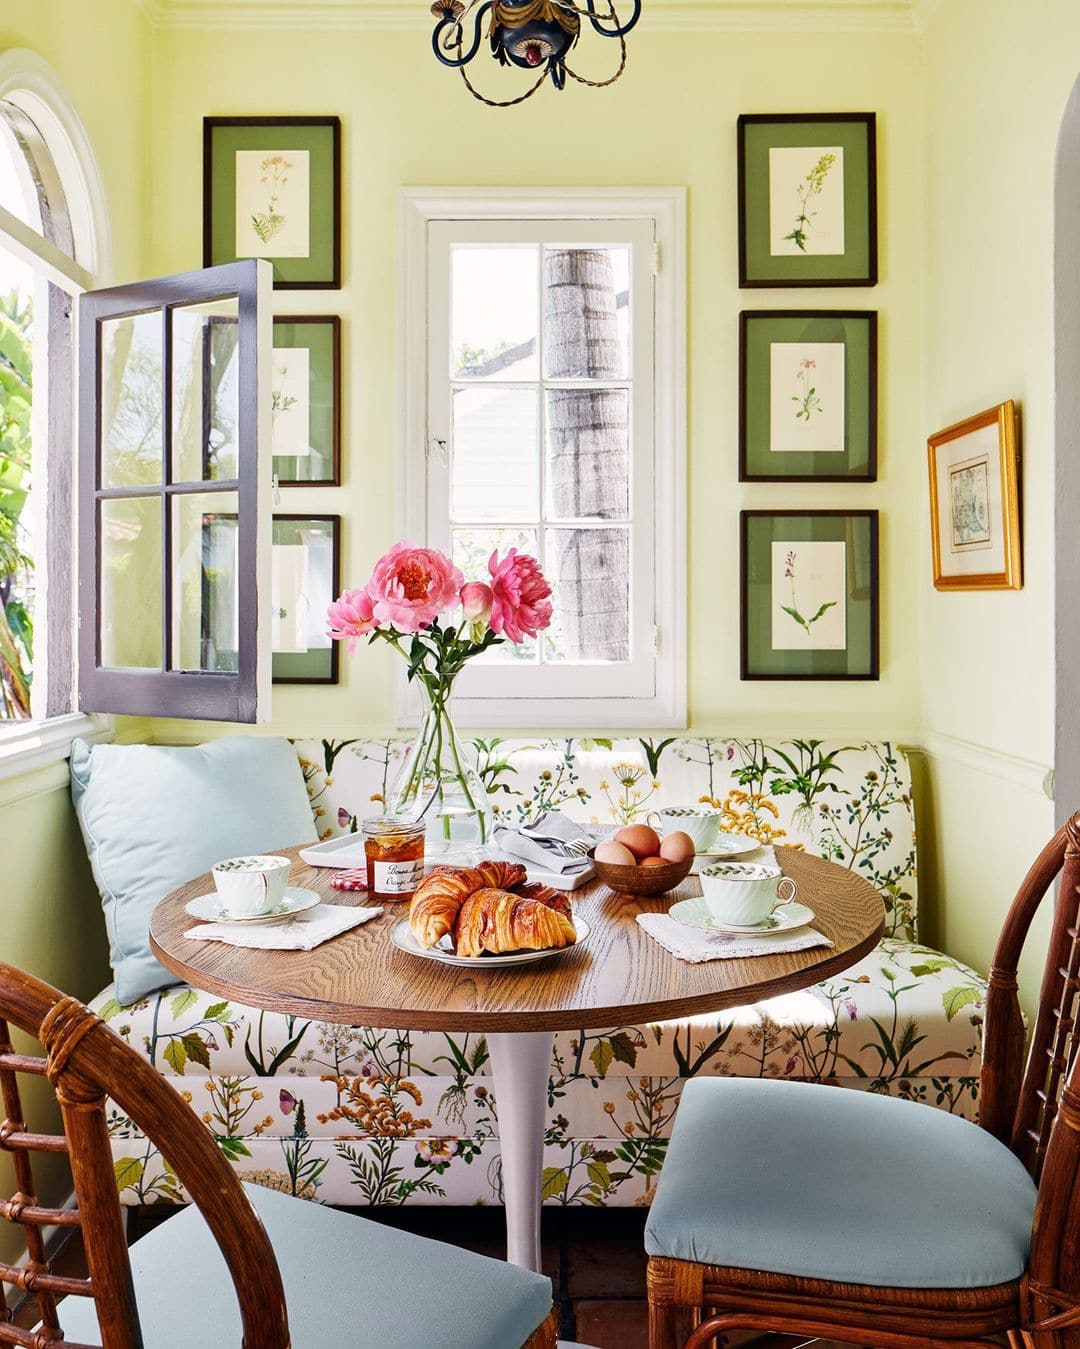 Breakfast nook featuring botanical prints in green featured in summer decor ideas